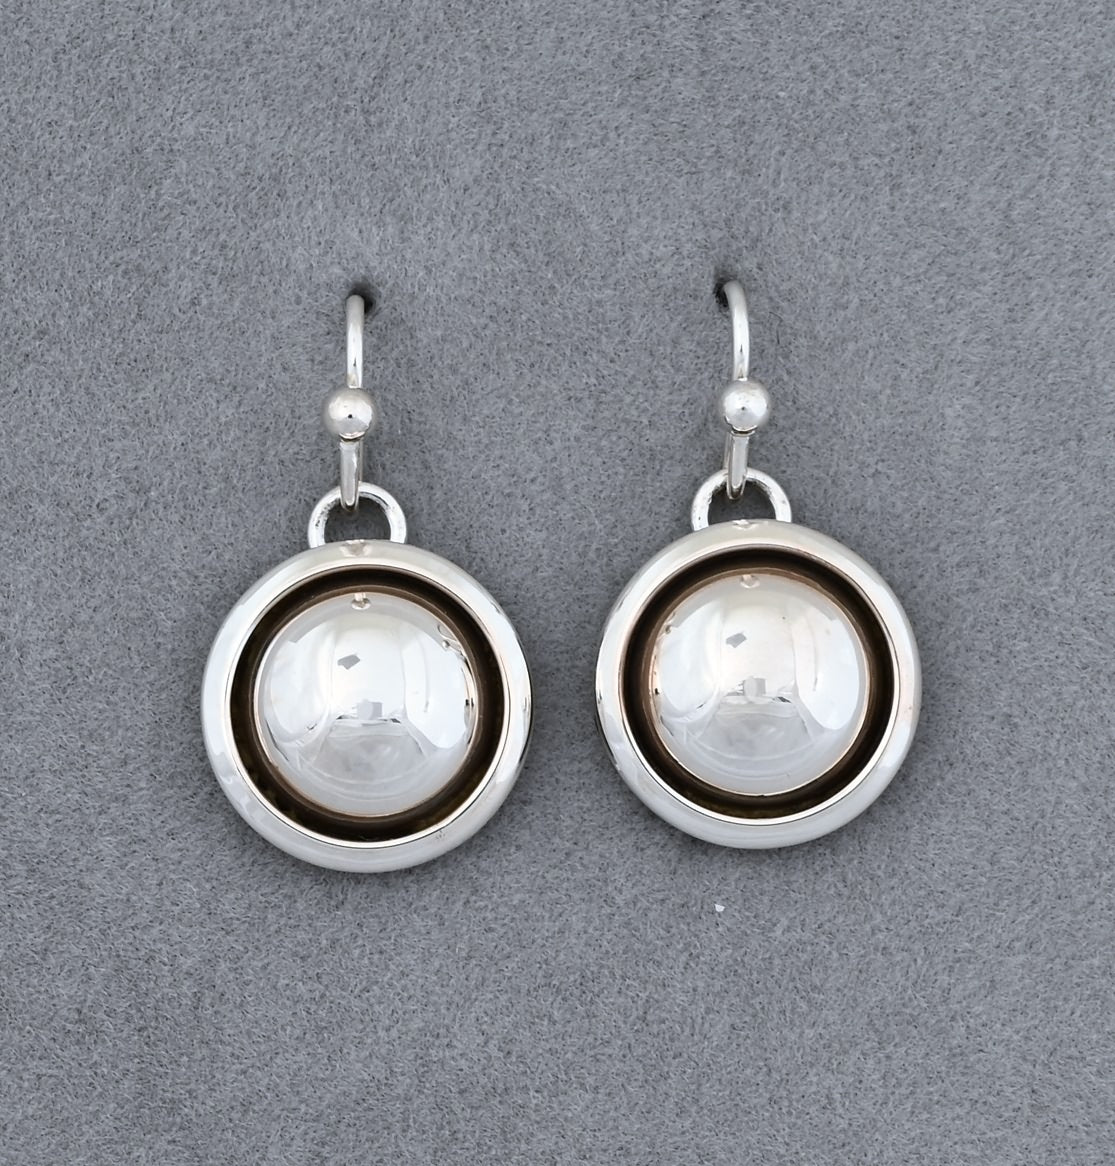 Earrings with Dome by Artie Yellowhorse